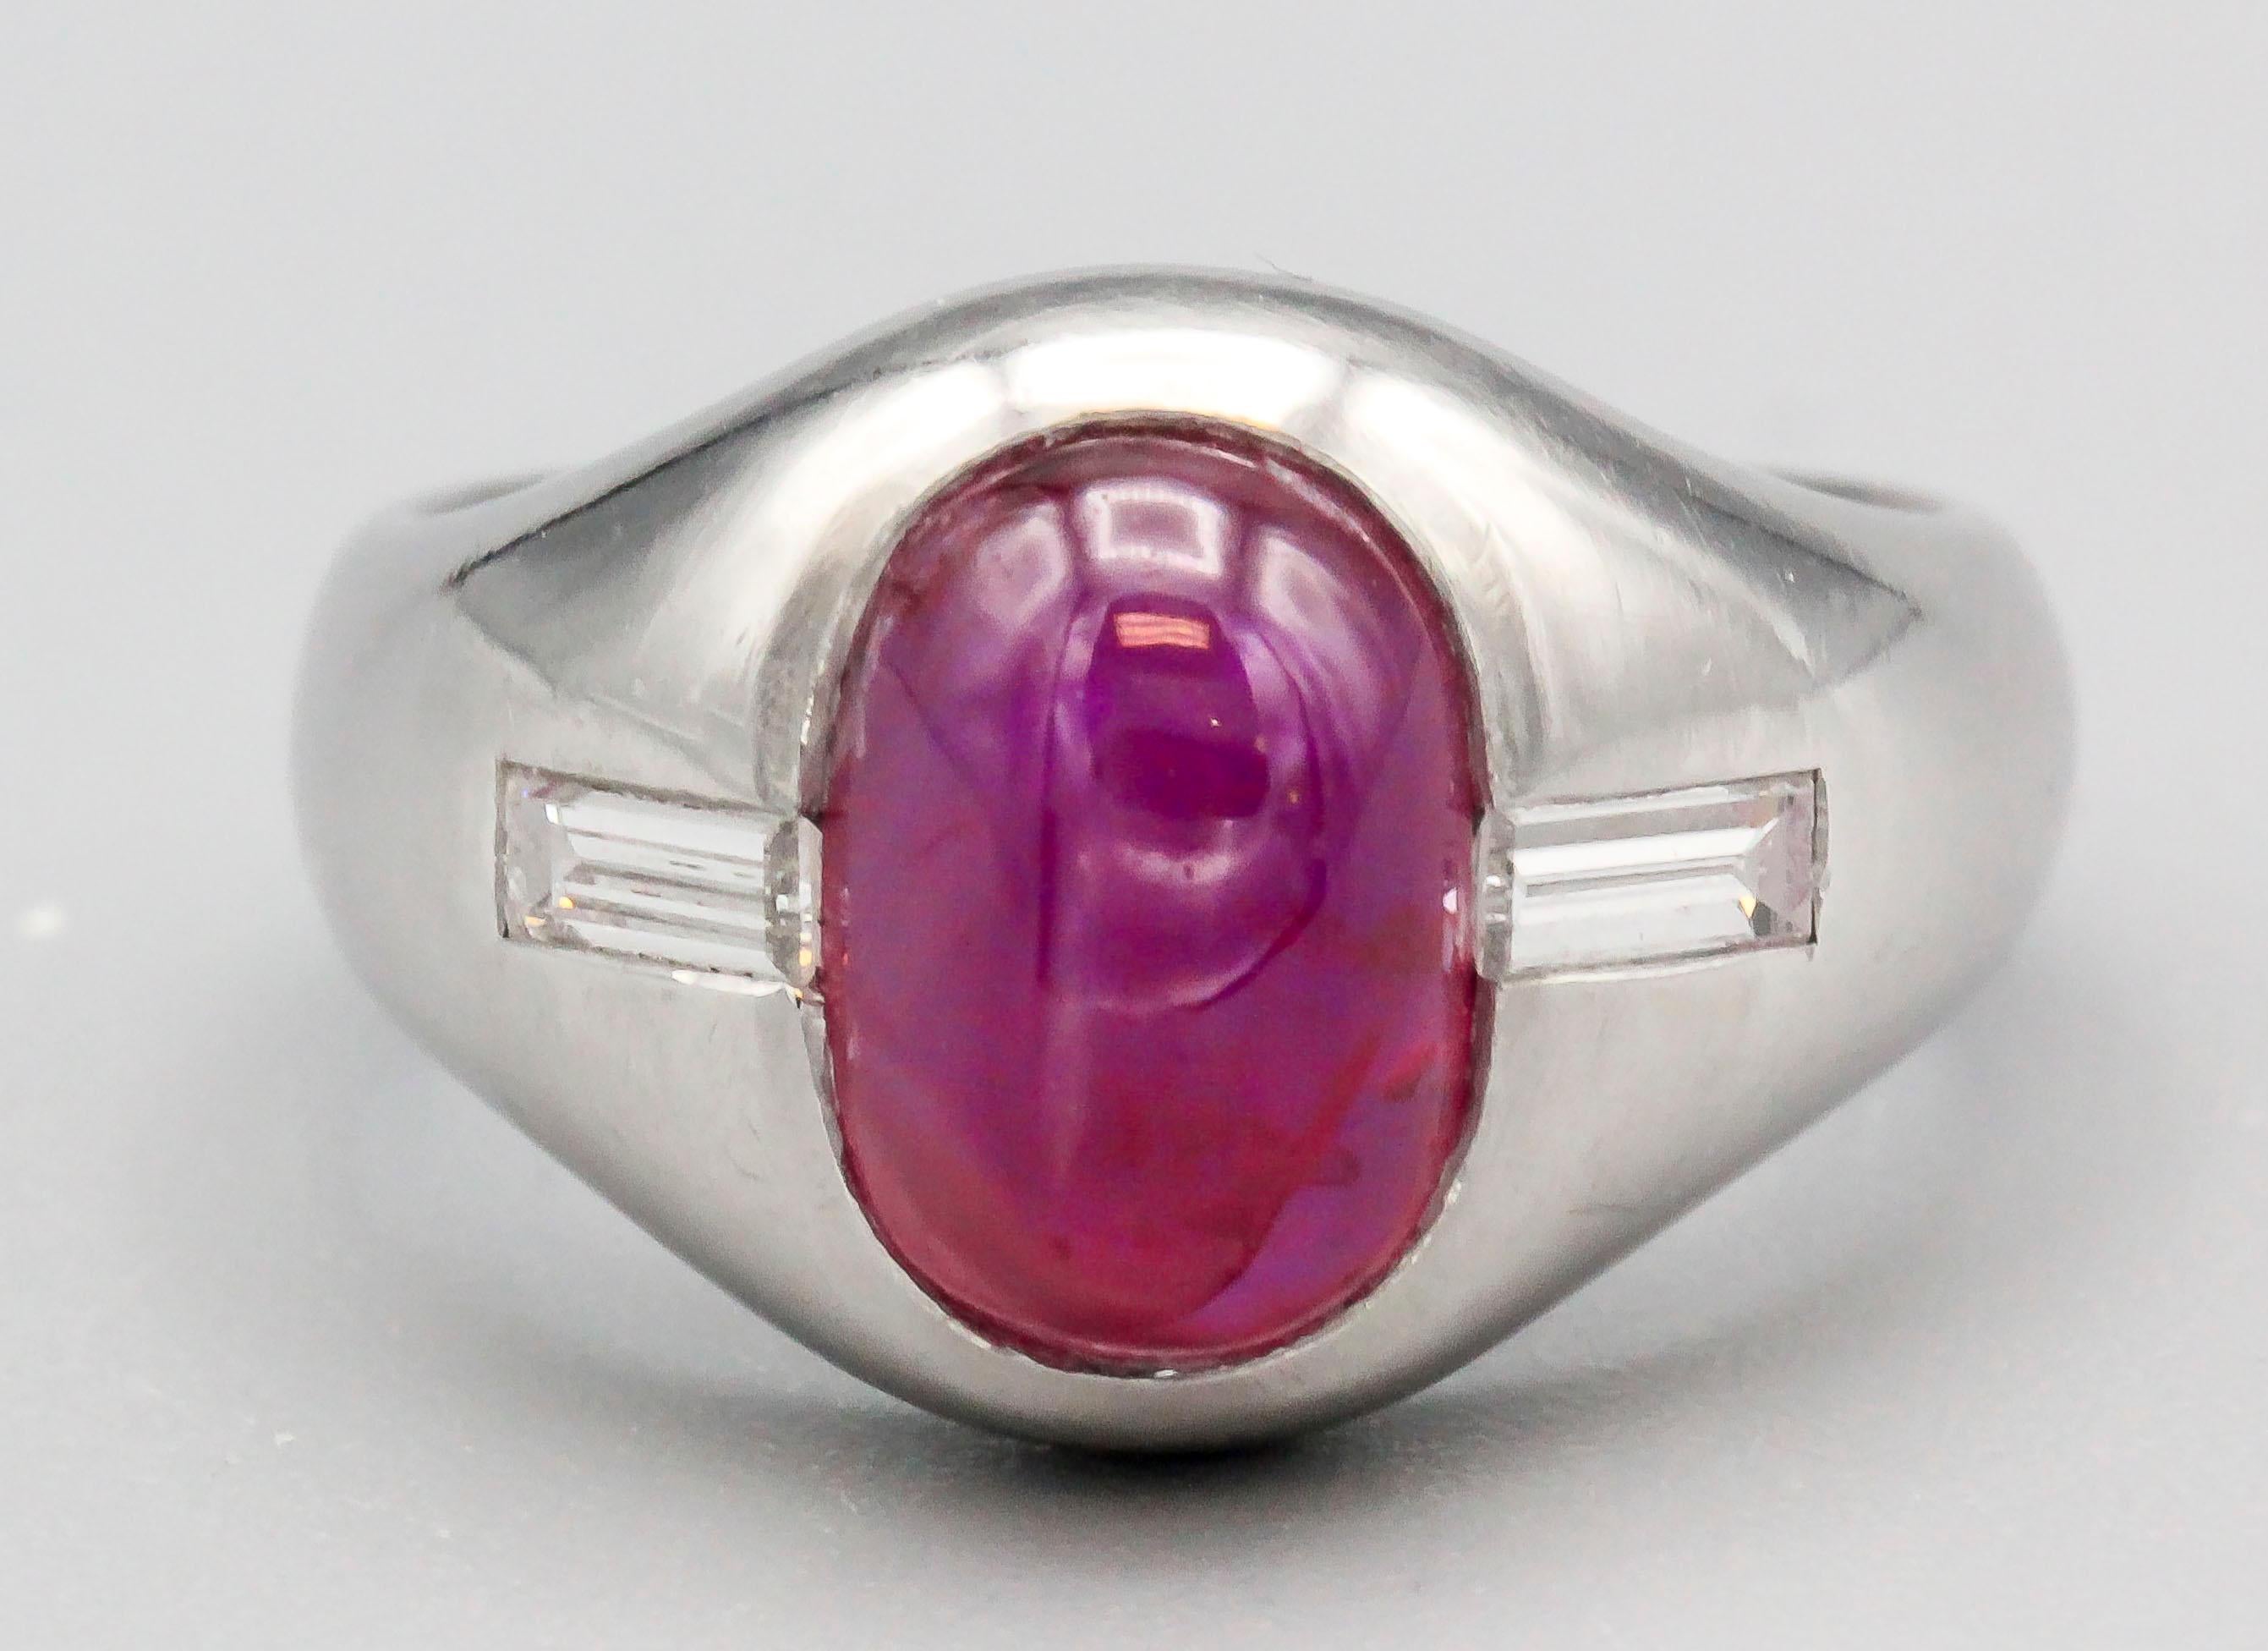 Fine cabochon star ruby and diamond ring by Bulgari, circa 1970s. Set in platinum, it features a rich red 3.23 carat cabochon ruby as its center stone, with high grade baguette cut diamonds on sides. Approx. size 5.5 and can be sized up or down if